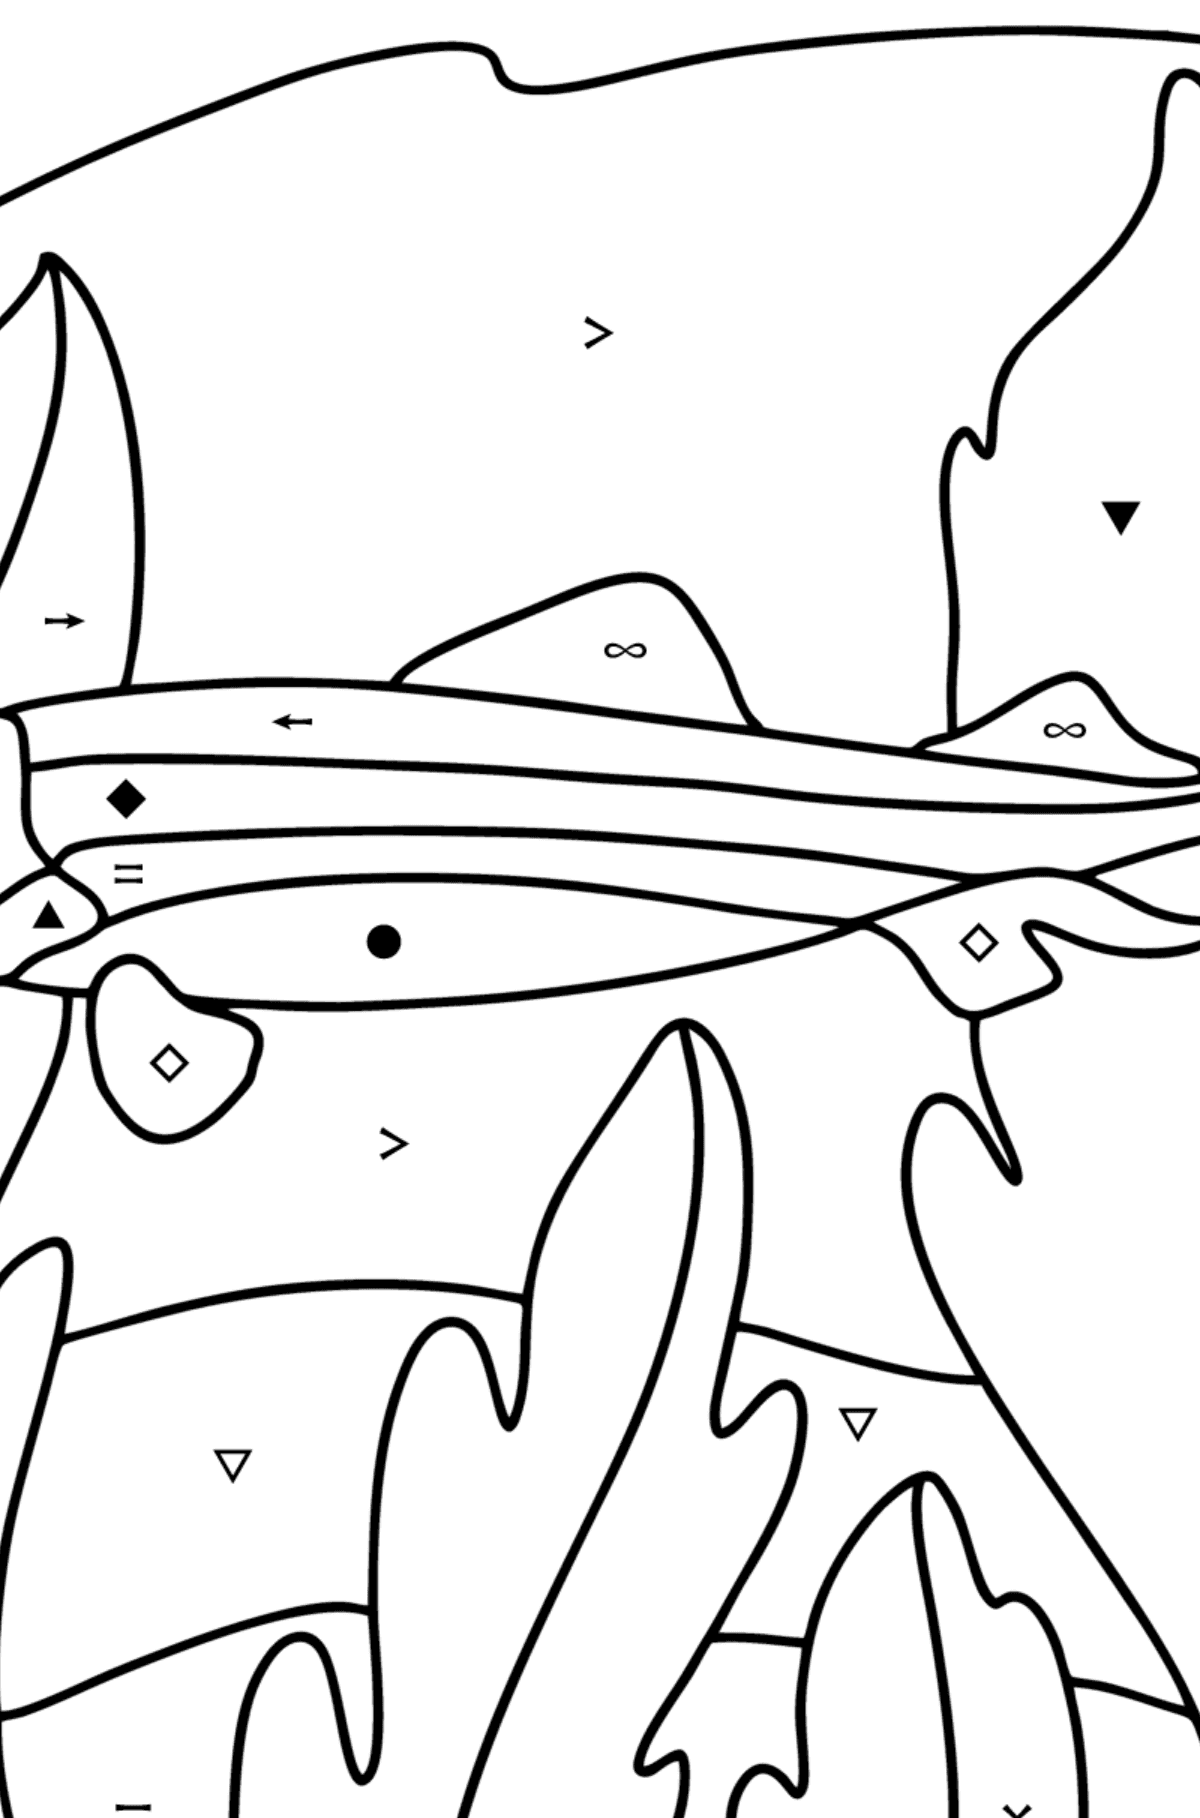 Crocodile Shark coloring page - Coloring by Symbols for Kids